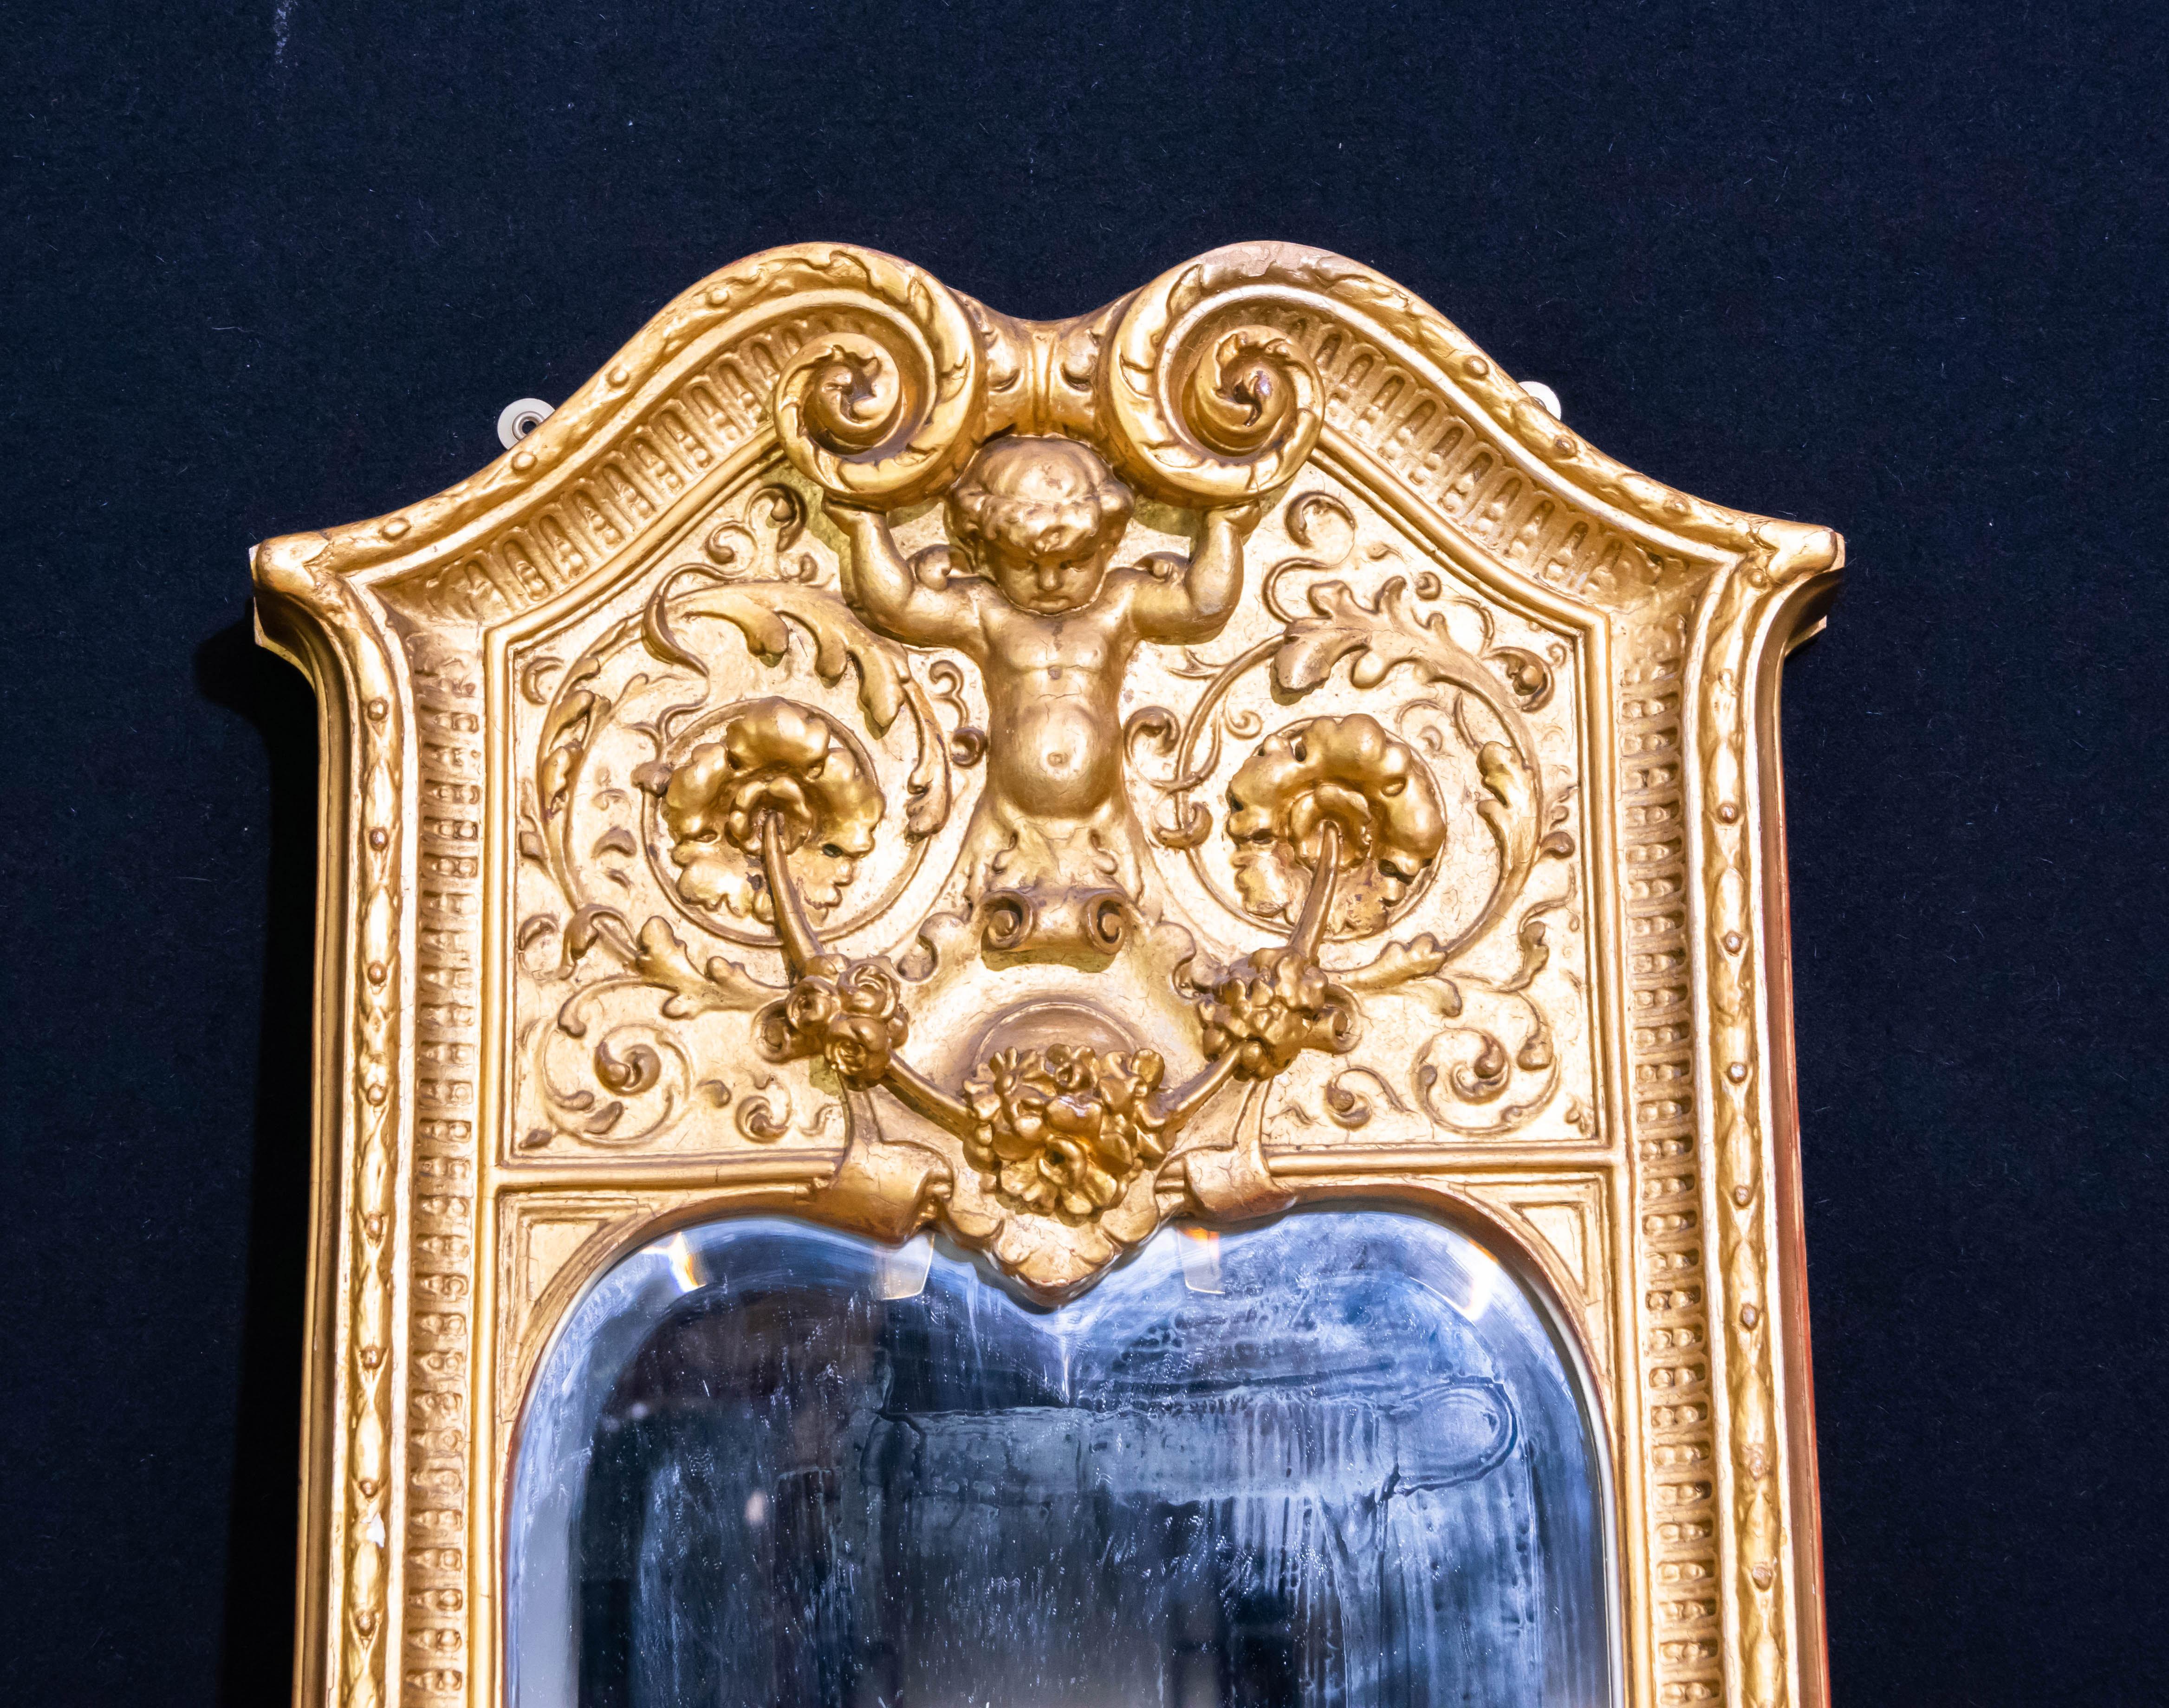 - Gorgeous antique French Empire pier mirror
- Hand carved frame adorned with cherubs
- Offered in great shape ready for home use right away. 

 